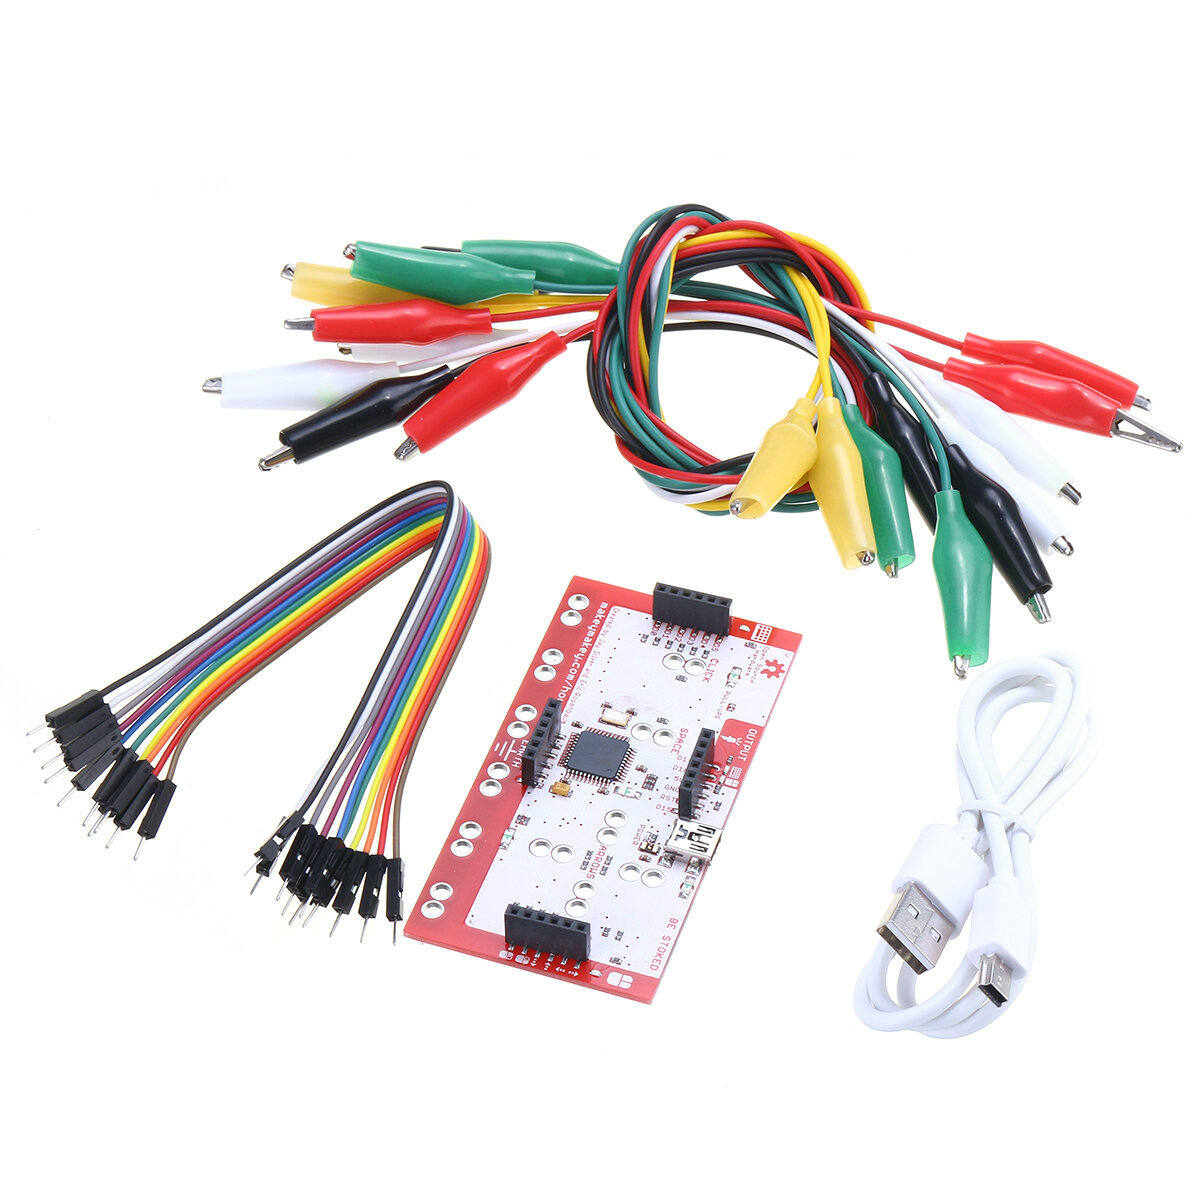 

Alligator Clip Jumper Wire Standard Controller Board Kit for Makey Makey Science Toy